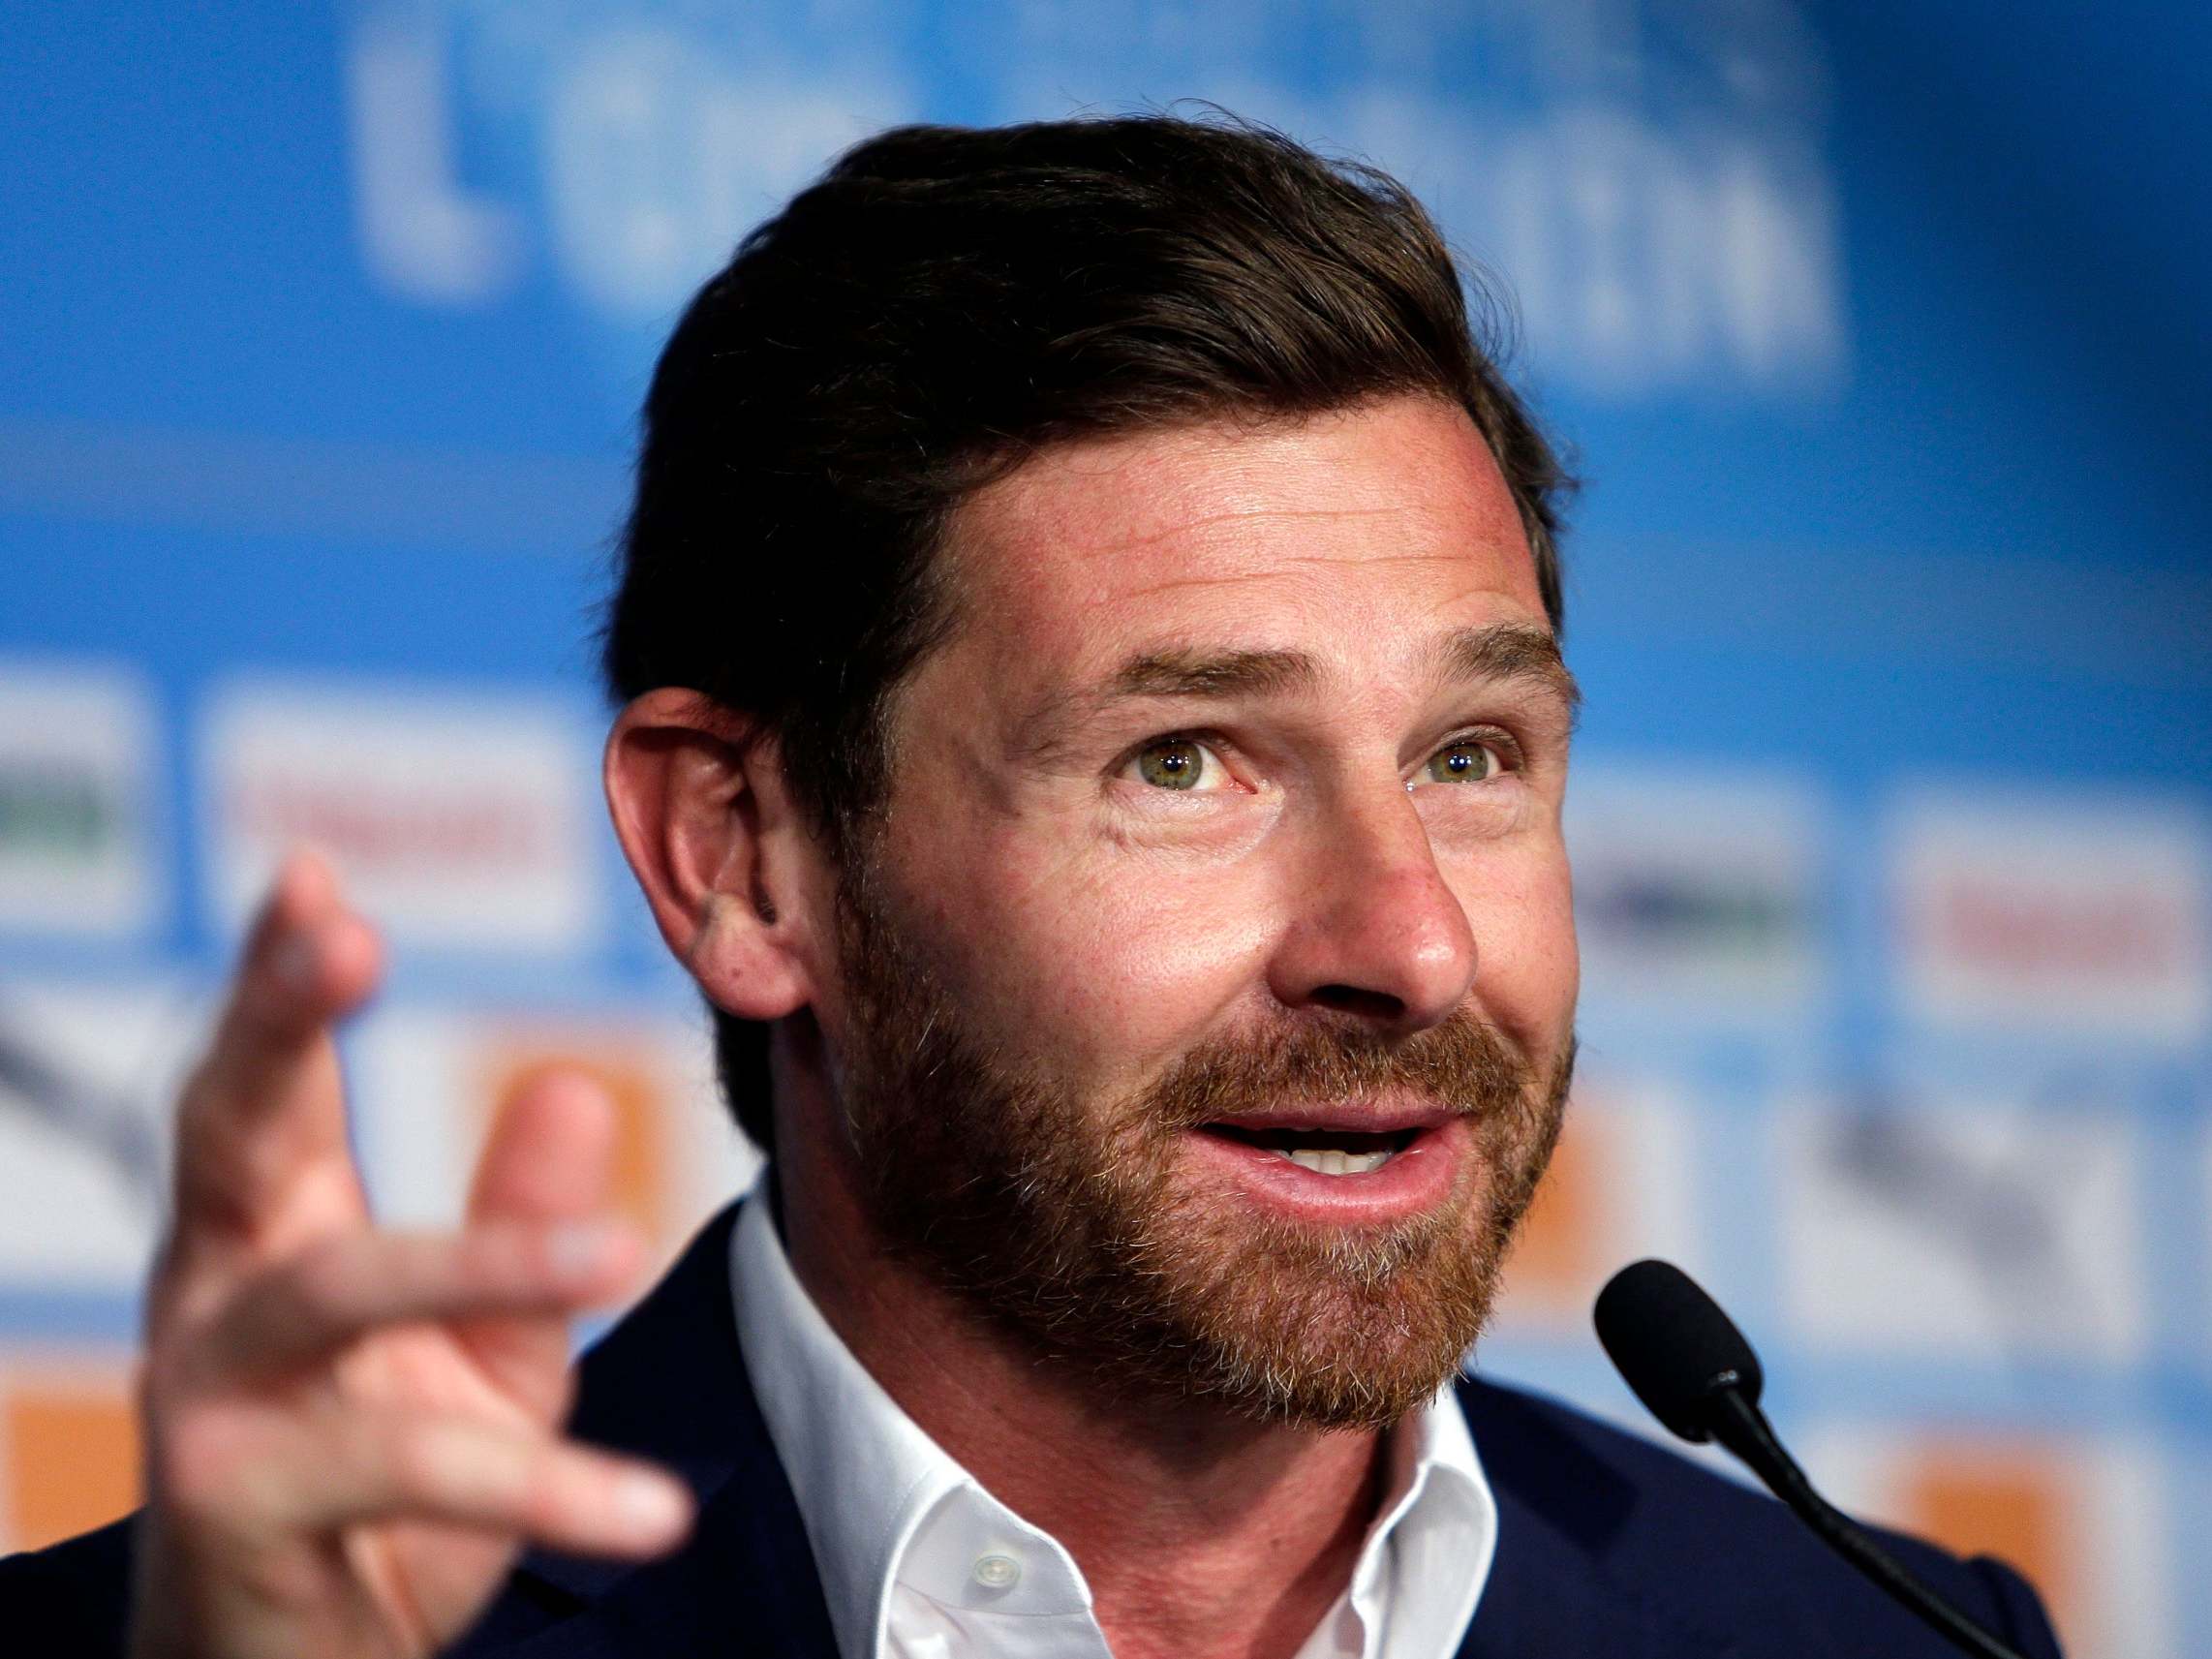 Villas-Boas hopes to take lessons out of his spells with Chelsea and Spurs